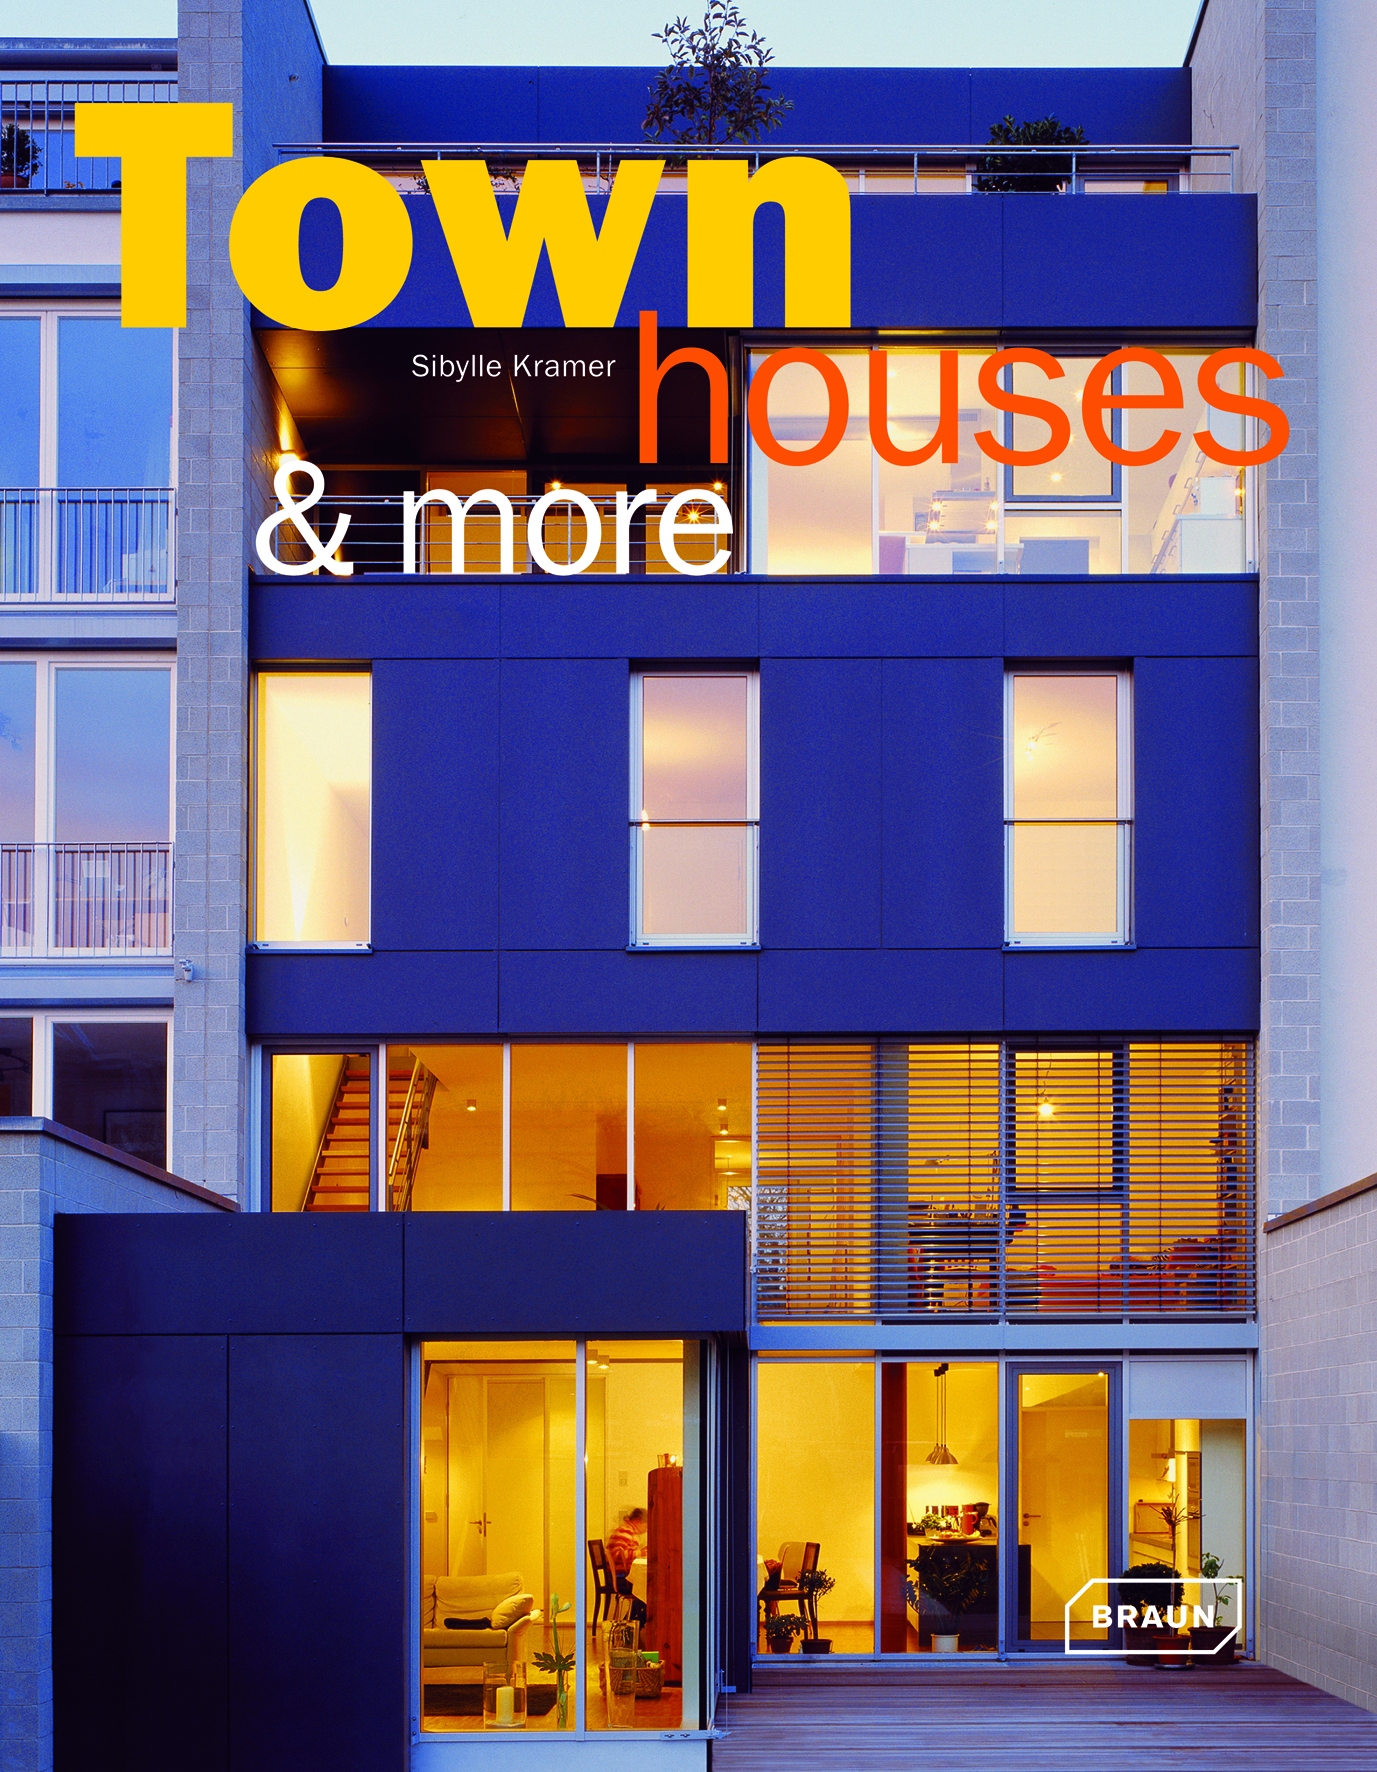 Town houses & more